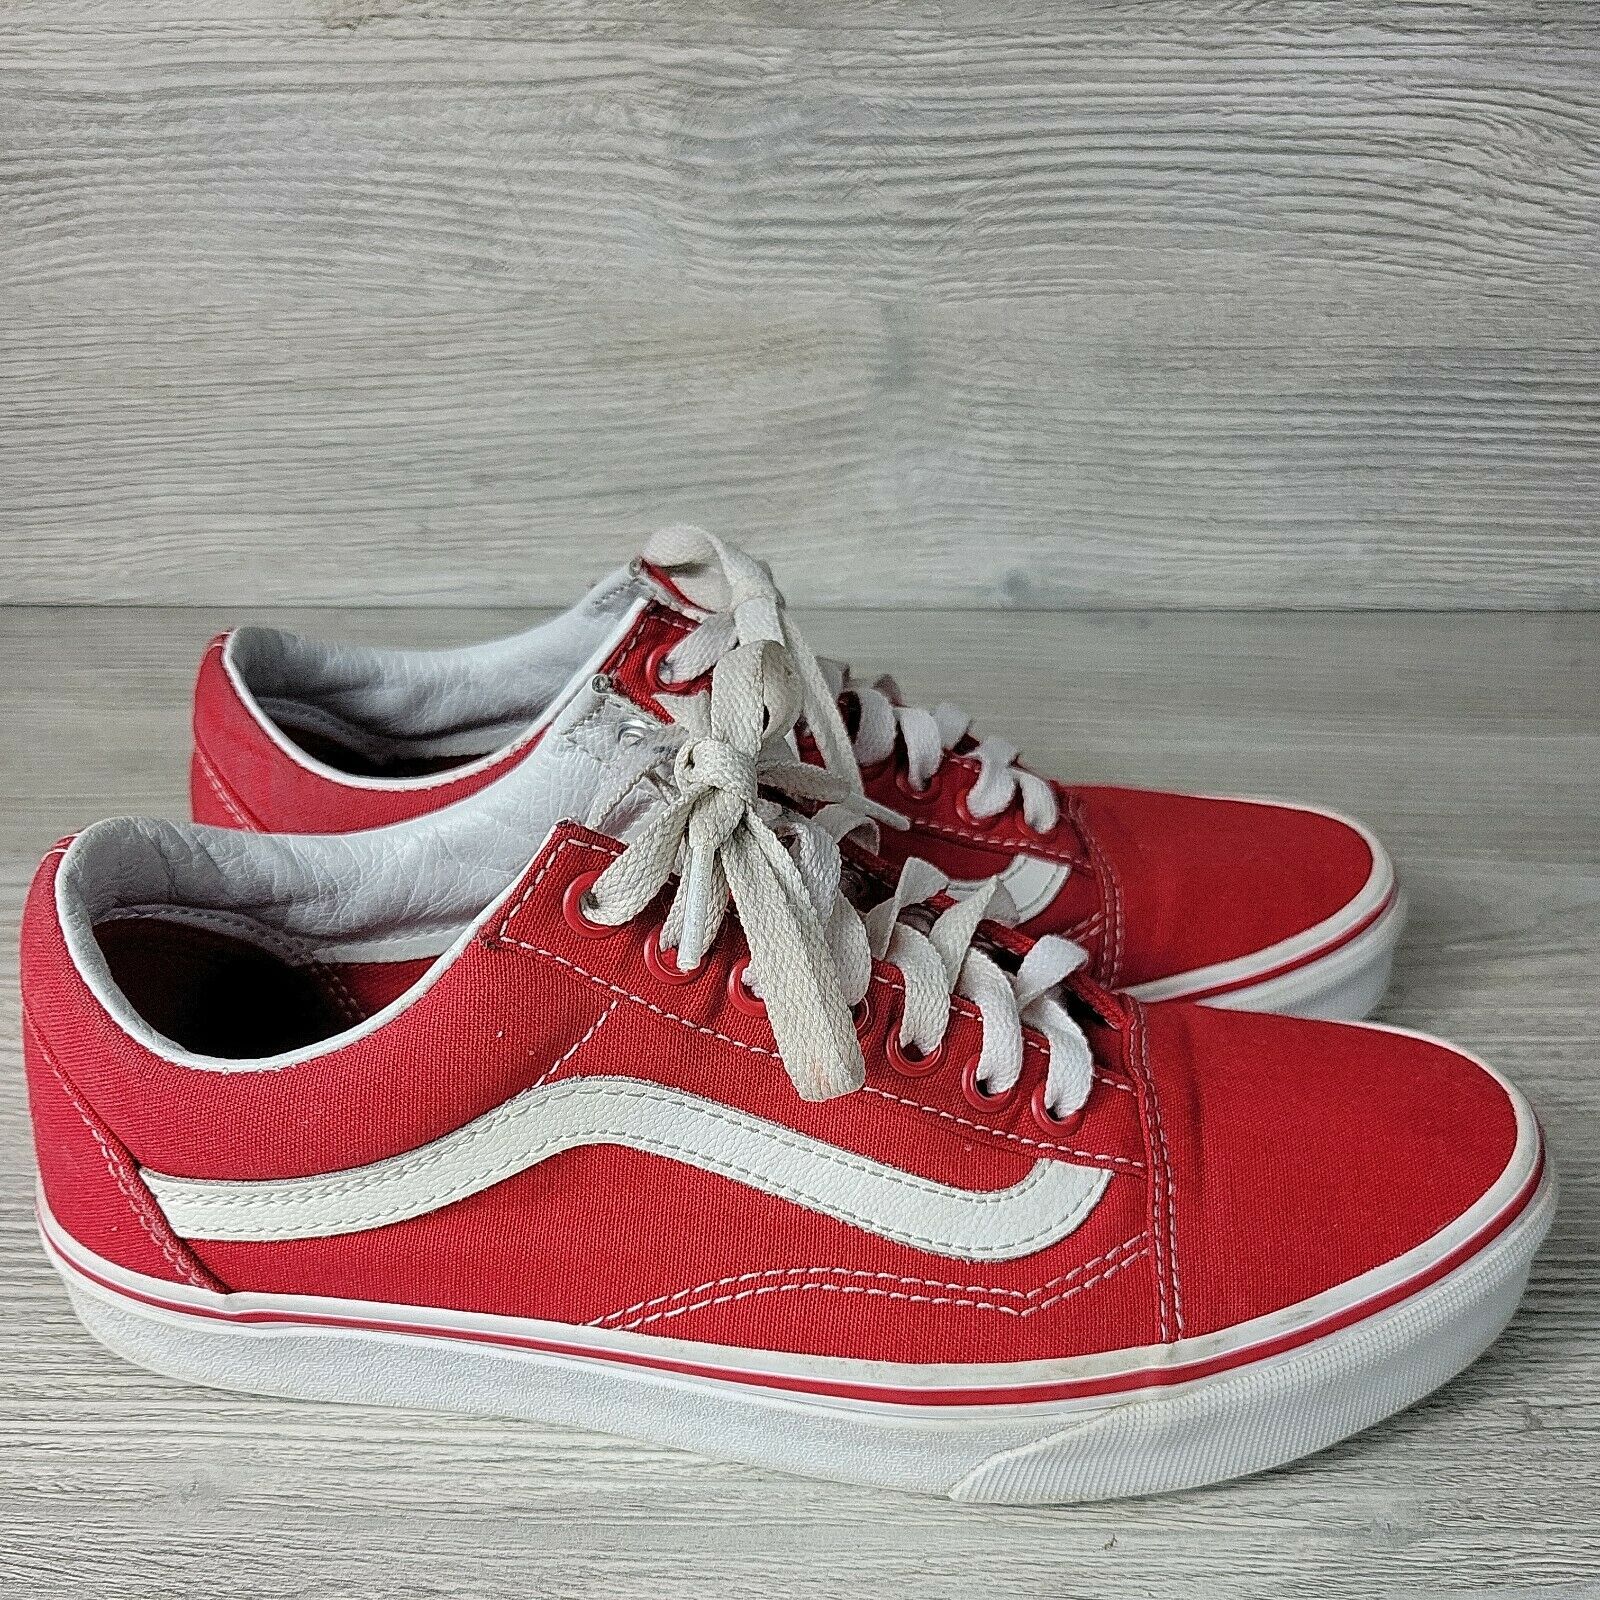 VANS OLD SKOOL Lows Red White Lace-up Skate Walking Shoes MEN'S SIZE 7.5